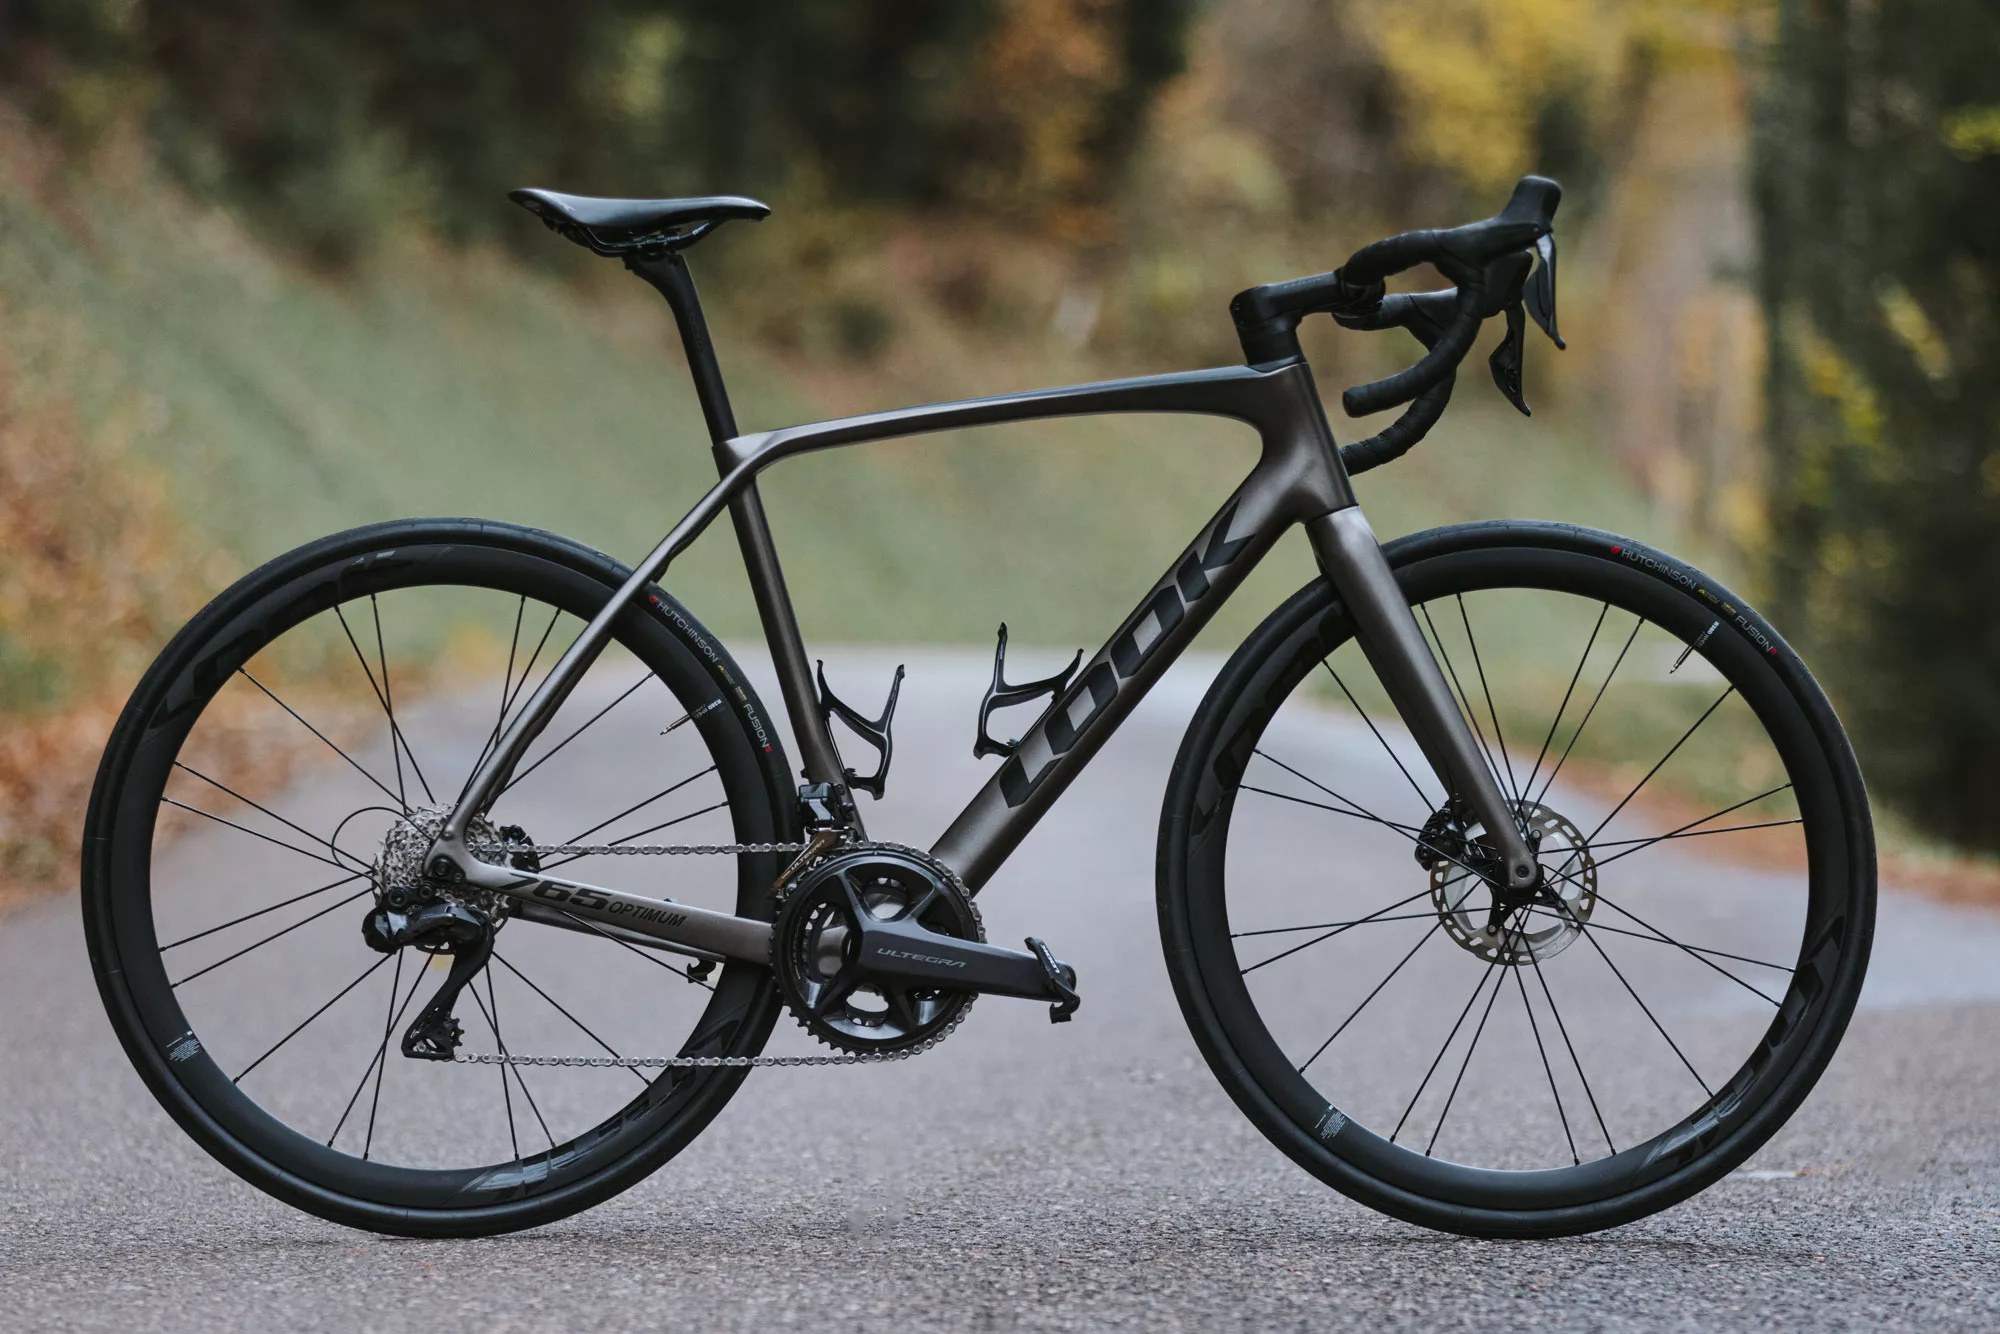 New Look 765 Optimum endurance road bike rides a wave of smoothness